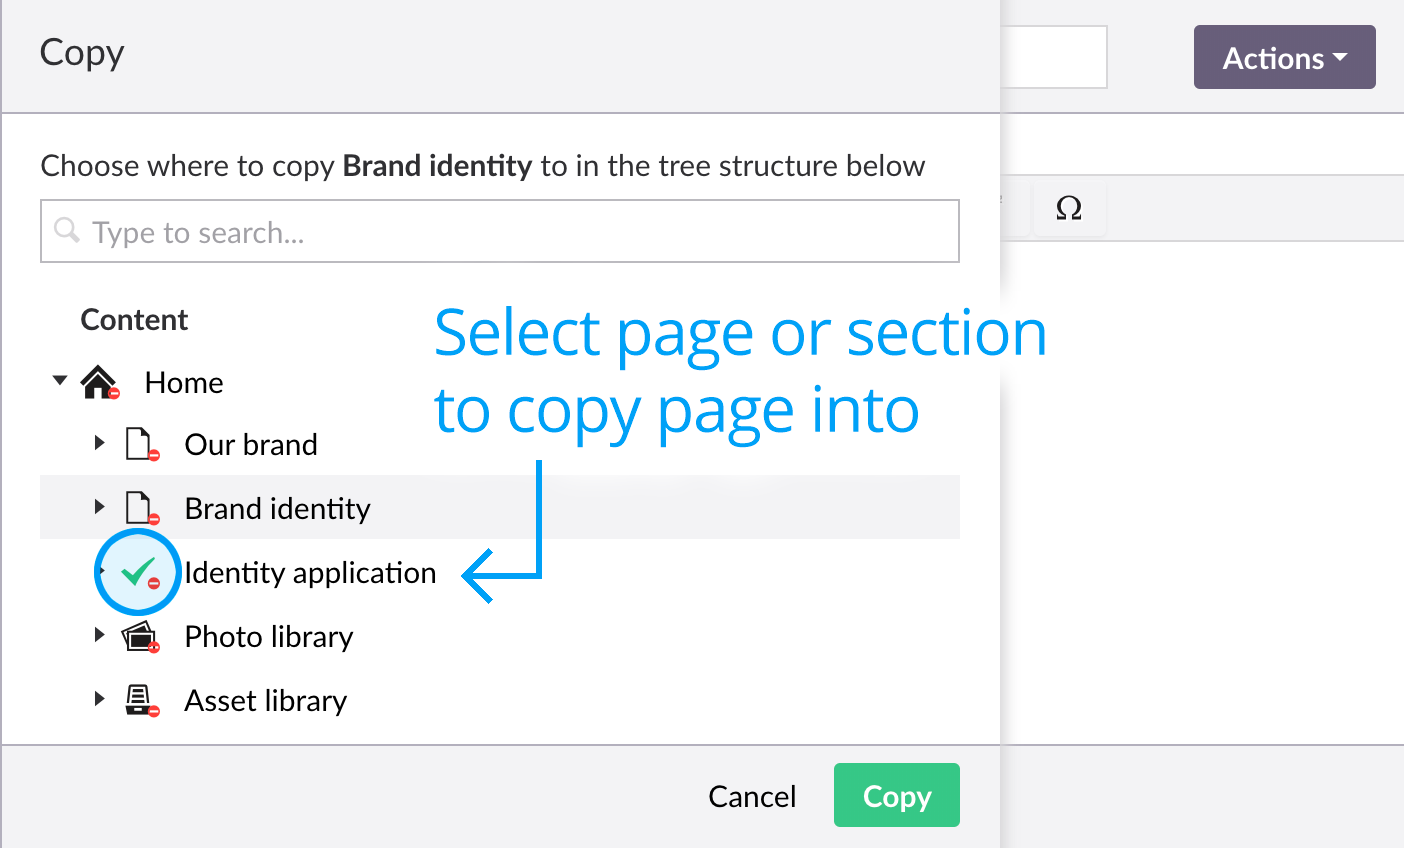 Copying pages - Select page destination